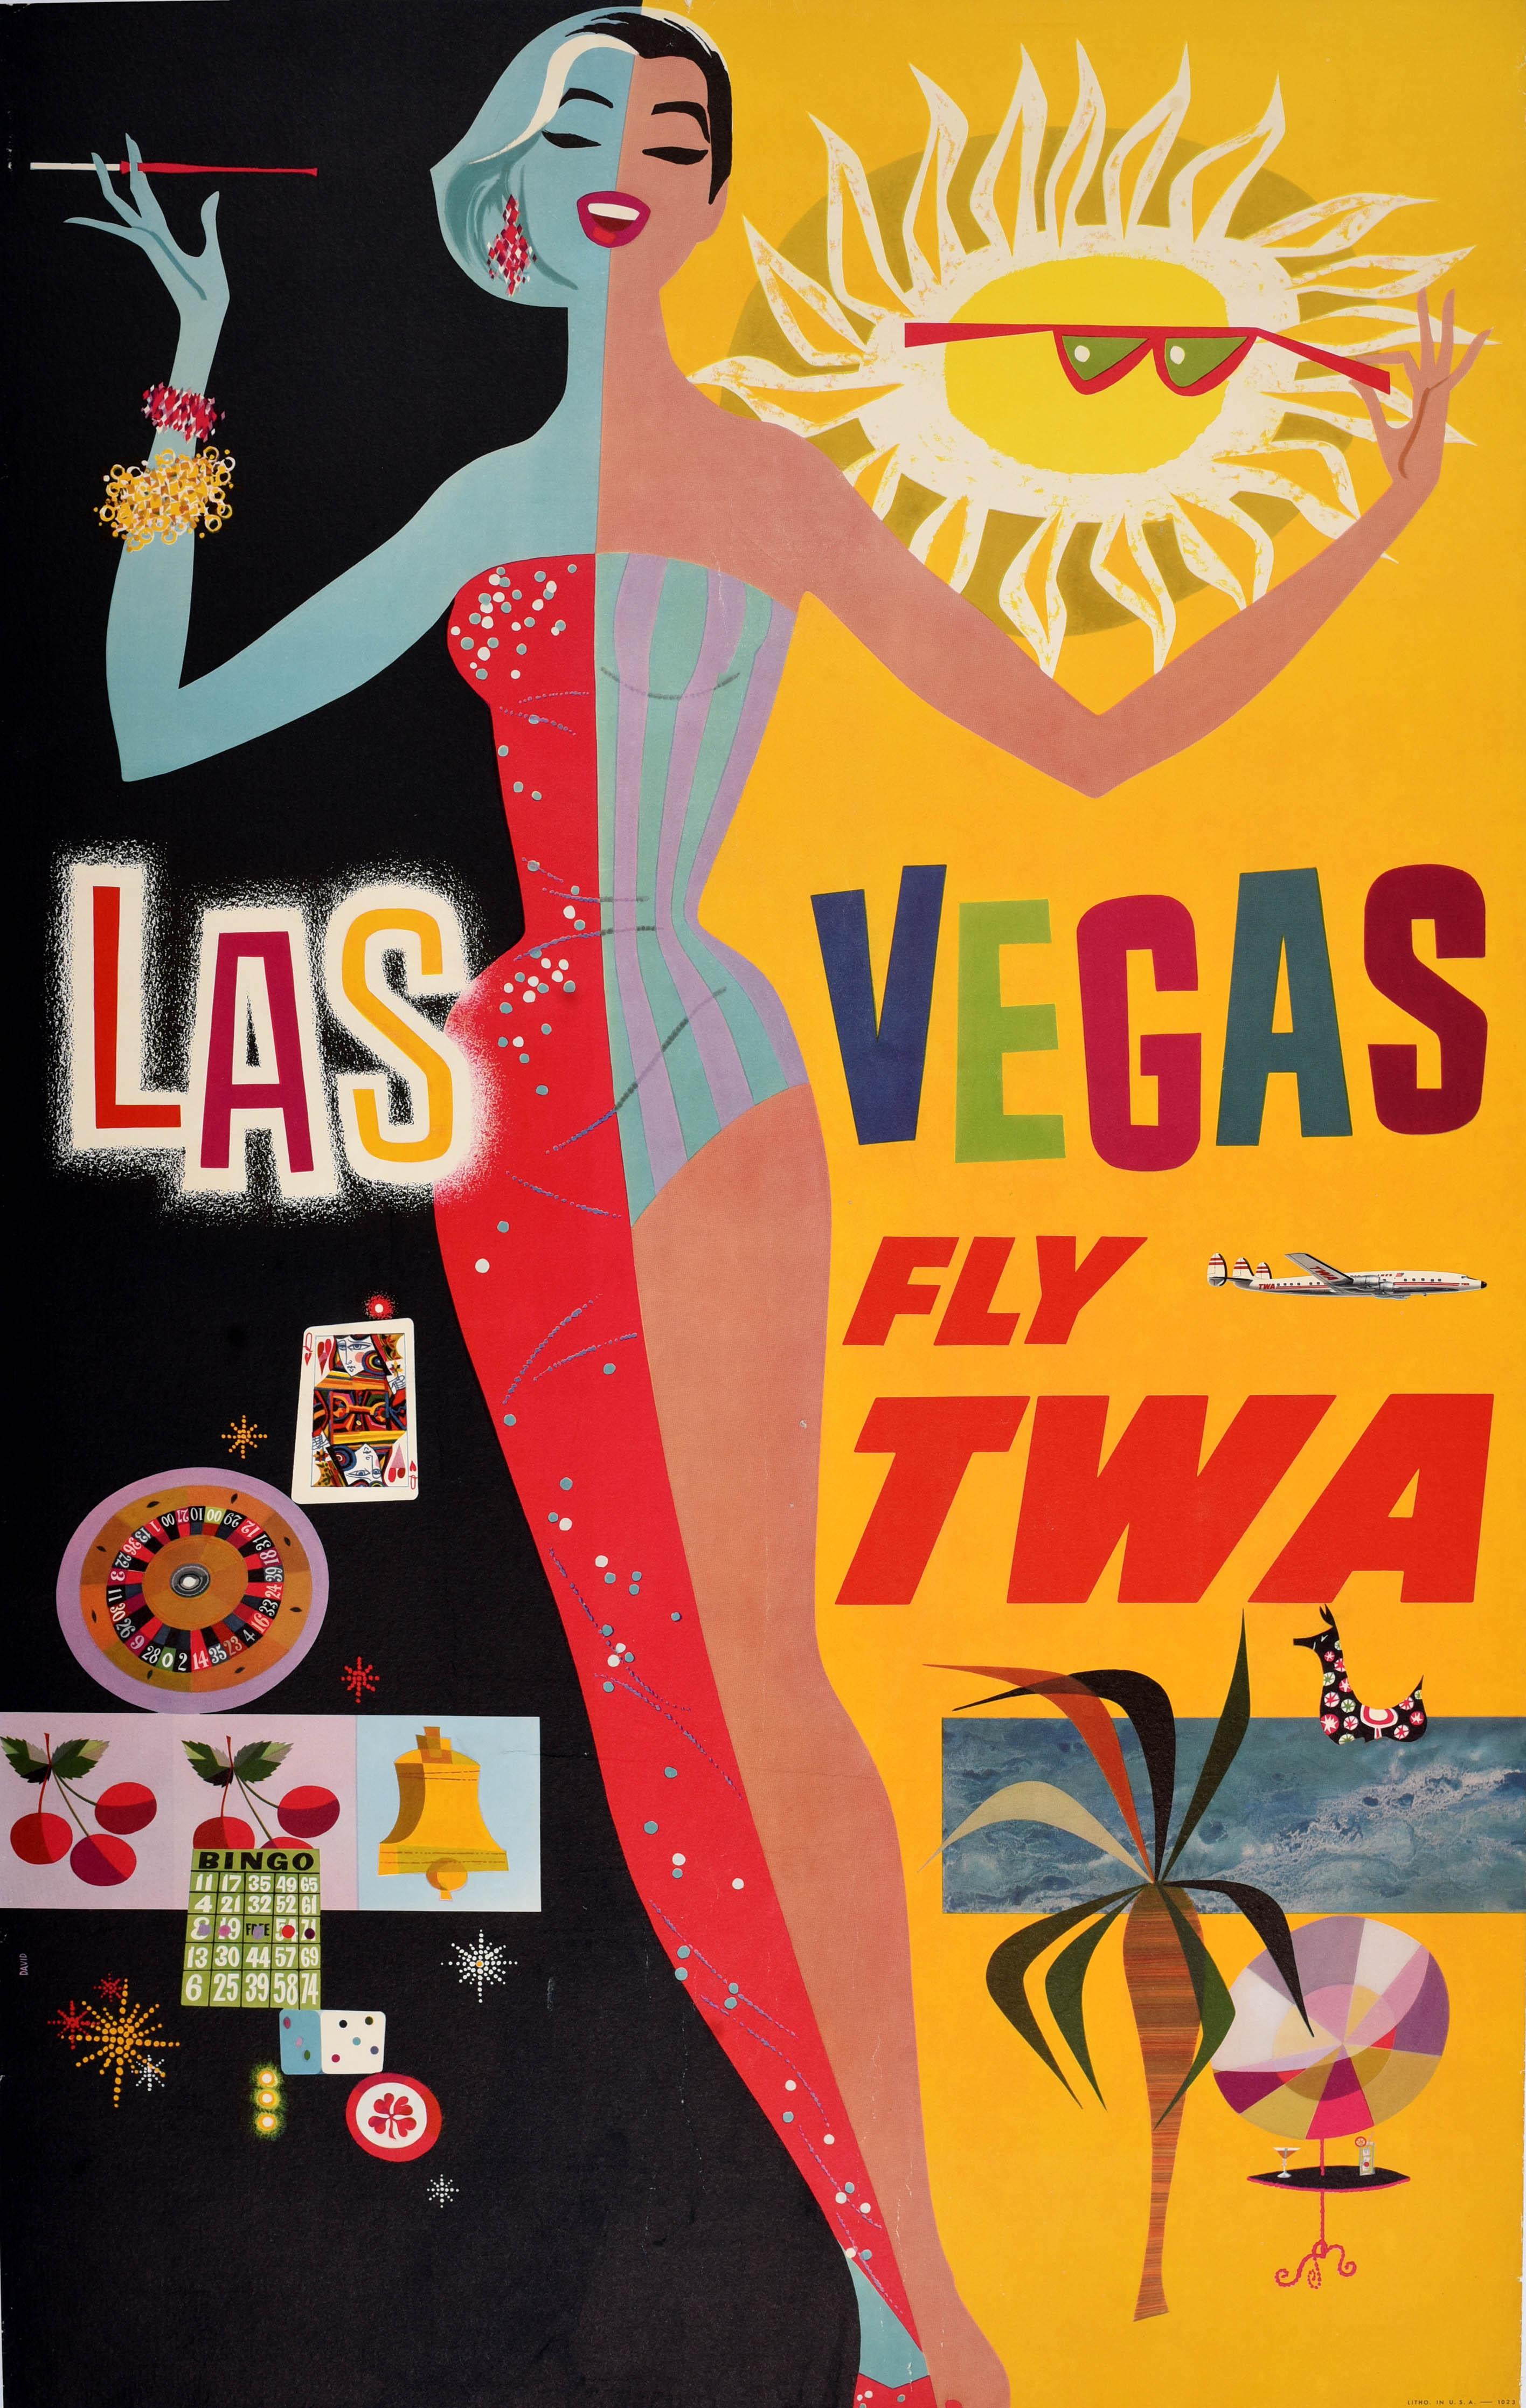 Original vintage mid-century airline travel poster advertising Las Vegas Fly TWA Trans World Airlines featuring a colourful design by the notable American artist David Klein (1918-2005) depicting a smiling elegant lady enjoying Las Vegas at night